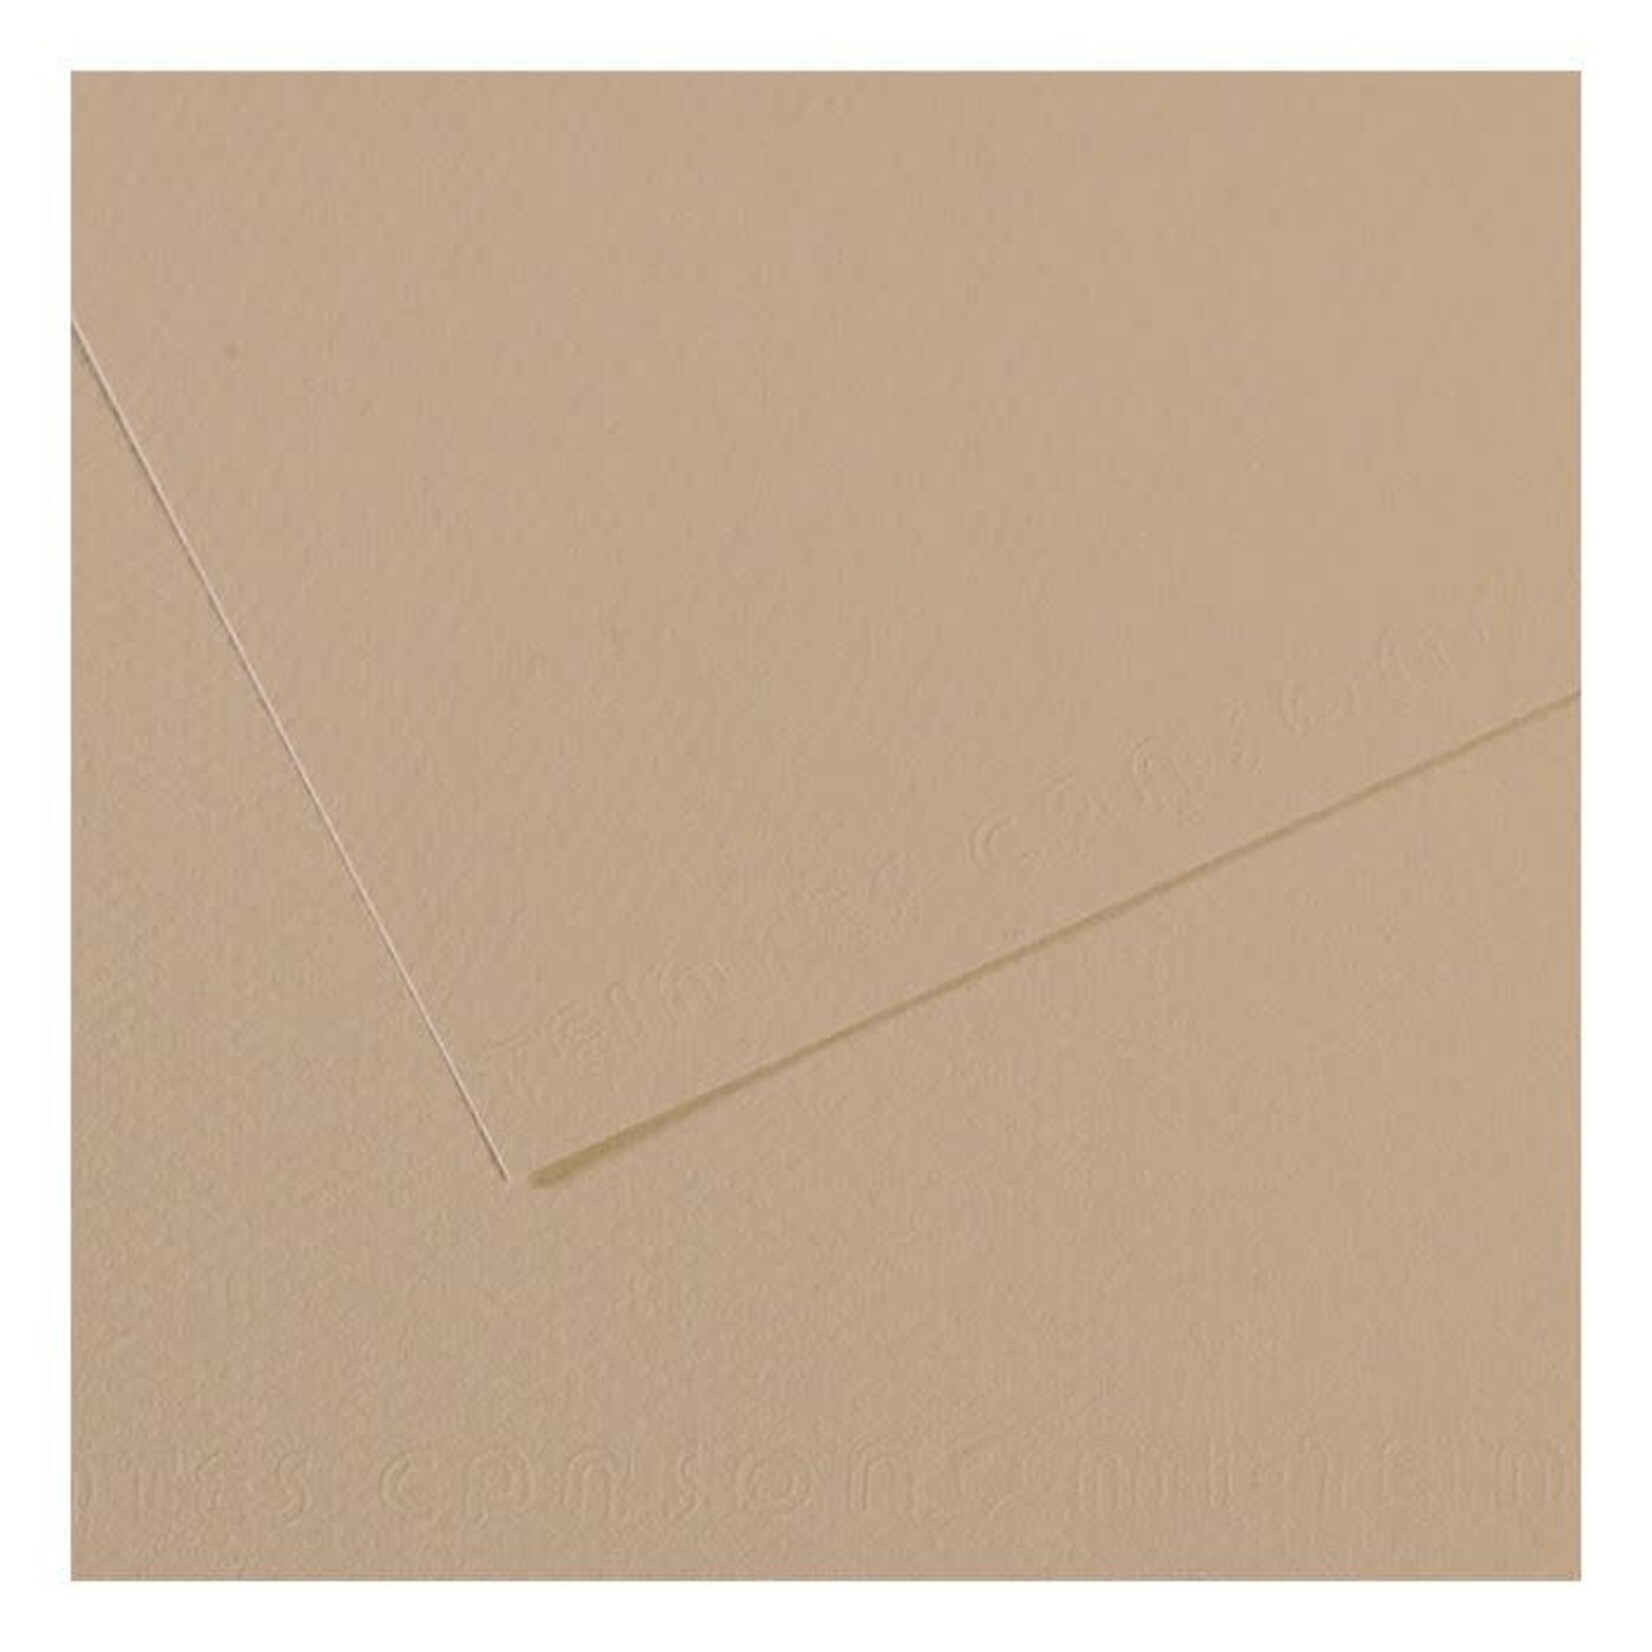 Canson Mi-Teintes Paper Sheets, 19'' x 25'', Pearl